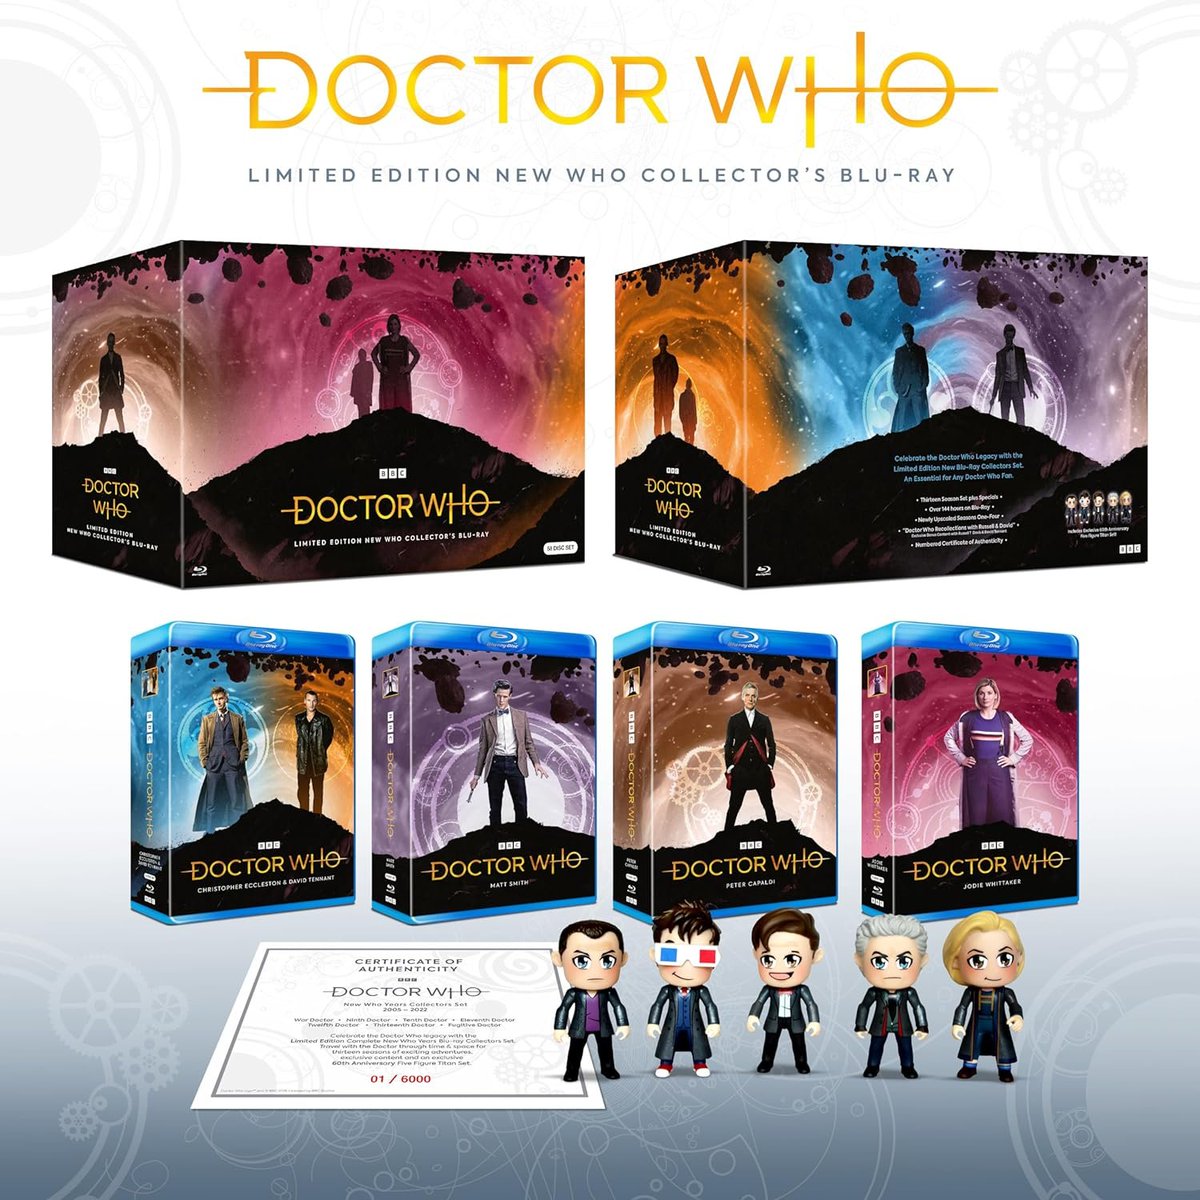 Preorder Doctor Who Limited Edition Complete New Who Collector's Blu-ray at Amazon #ad 
amzn.to/46jNroG

#doctorwho #doctorwhoredacted #bbc #blueray #dvd #uhd #4k #popholmes